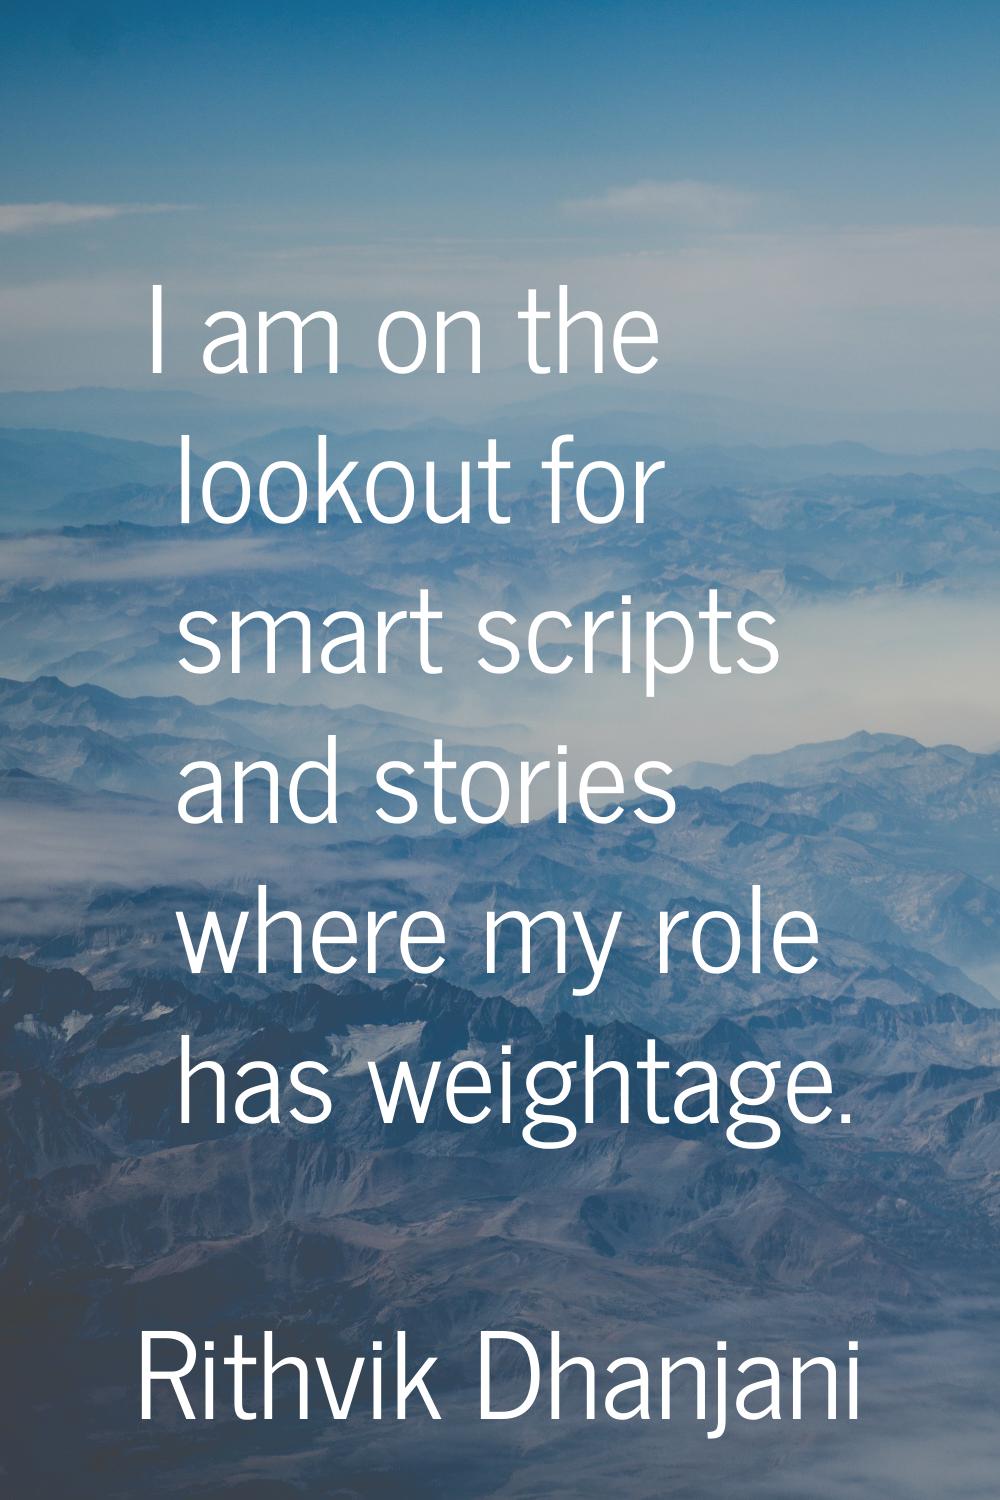 I am on the lookout for smart scripts and stories where my role has weightage.